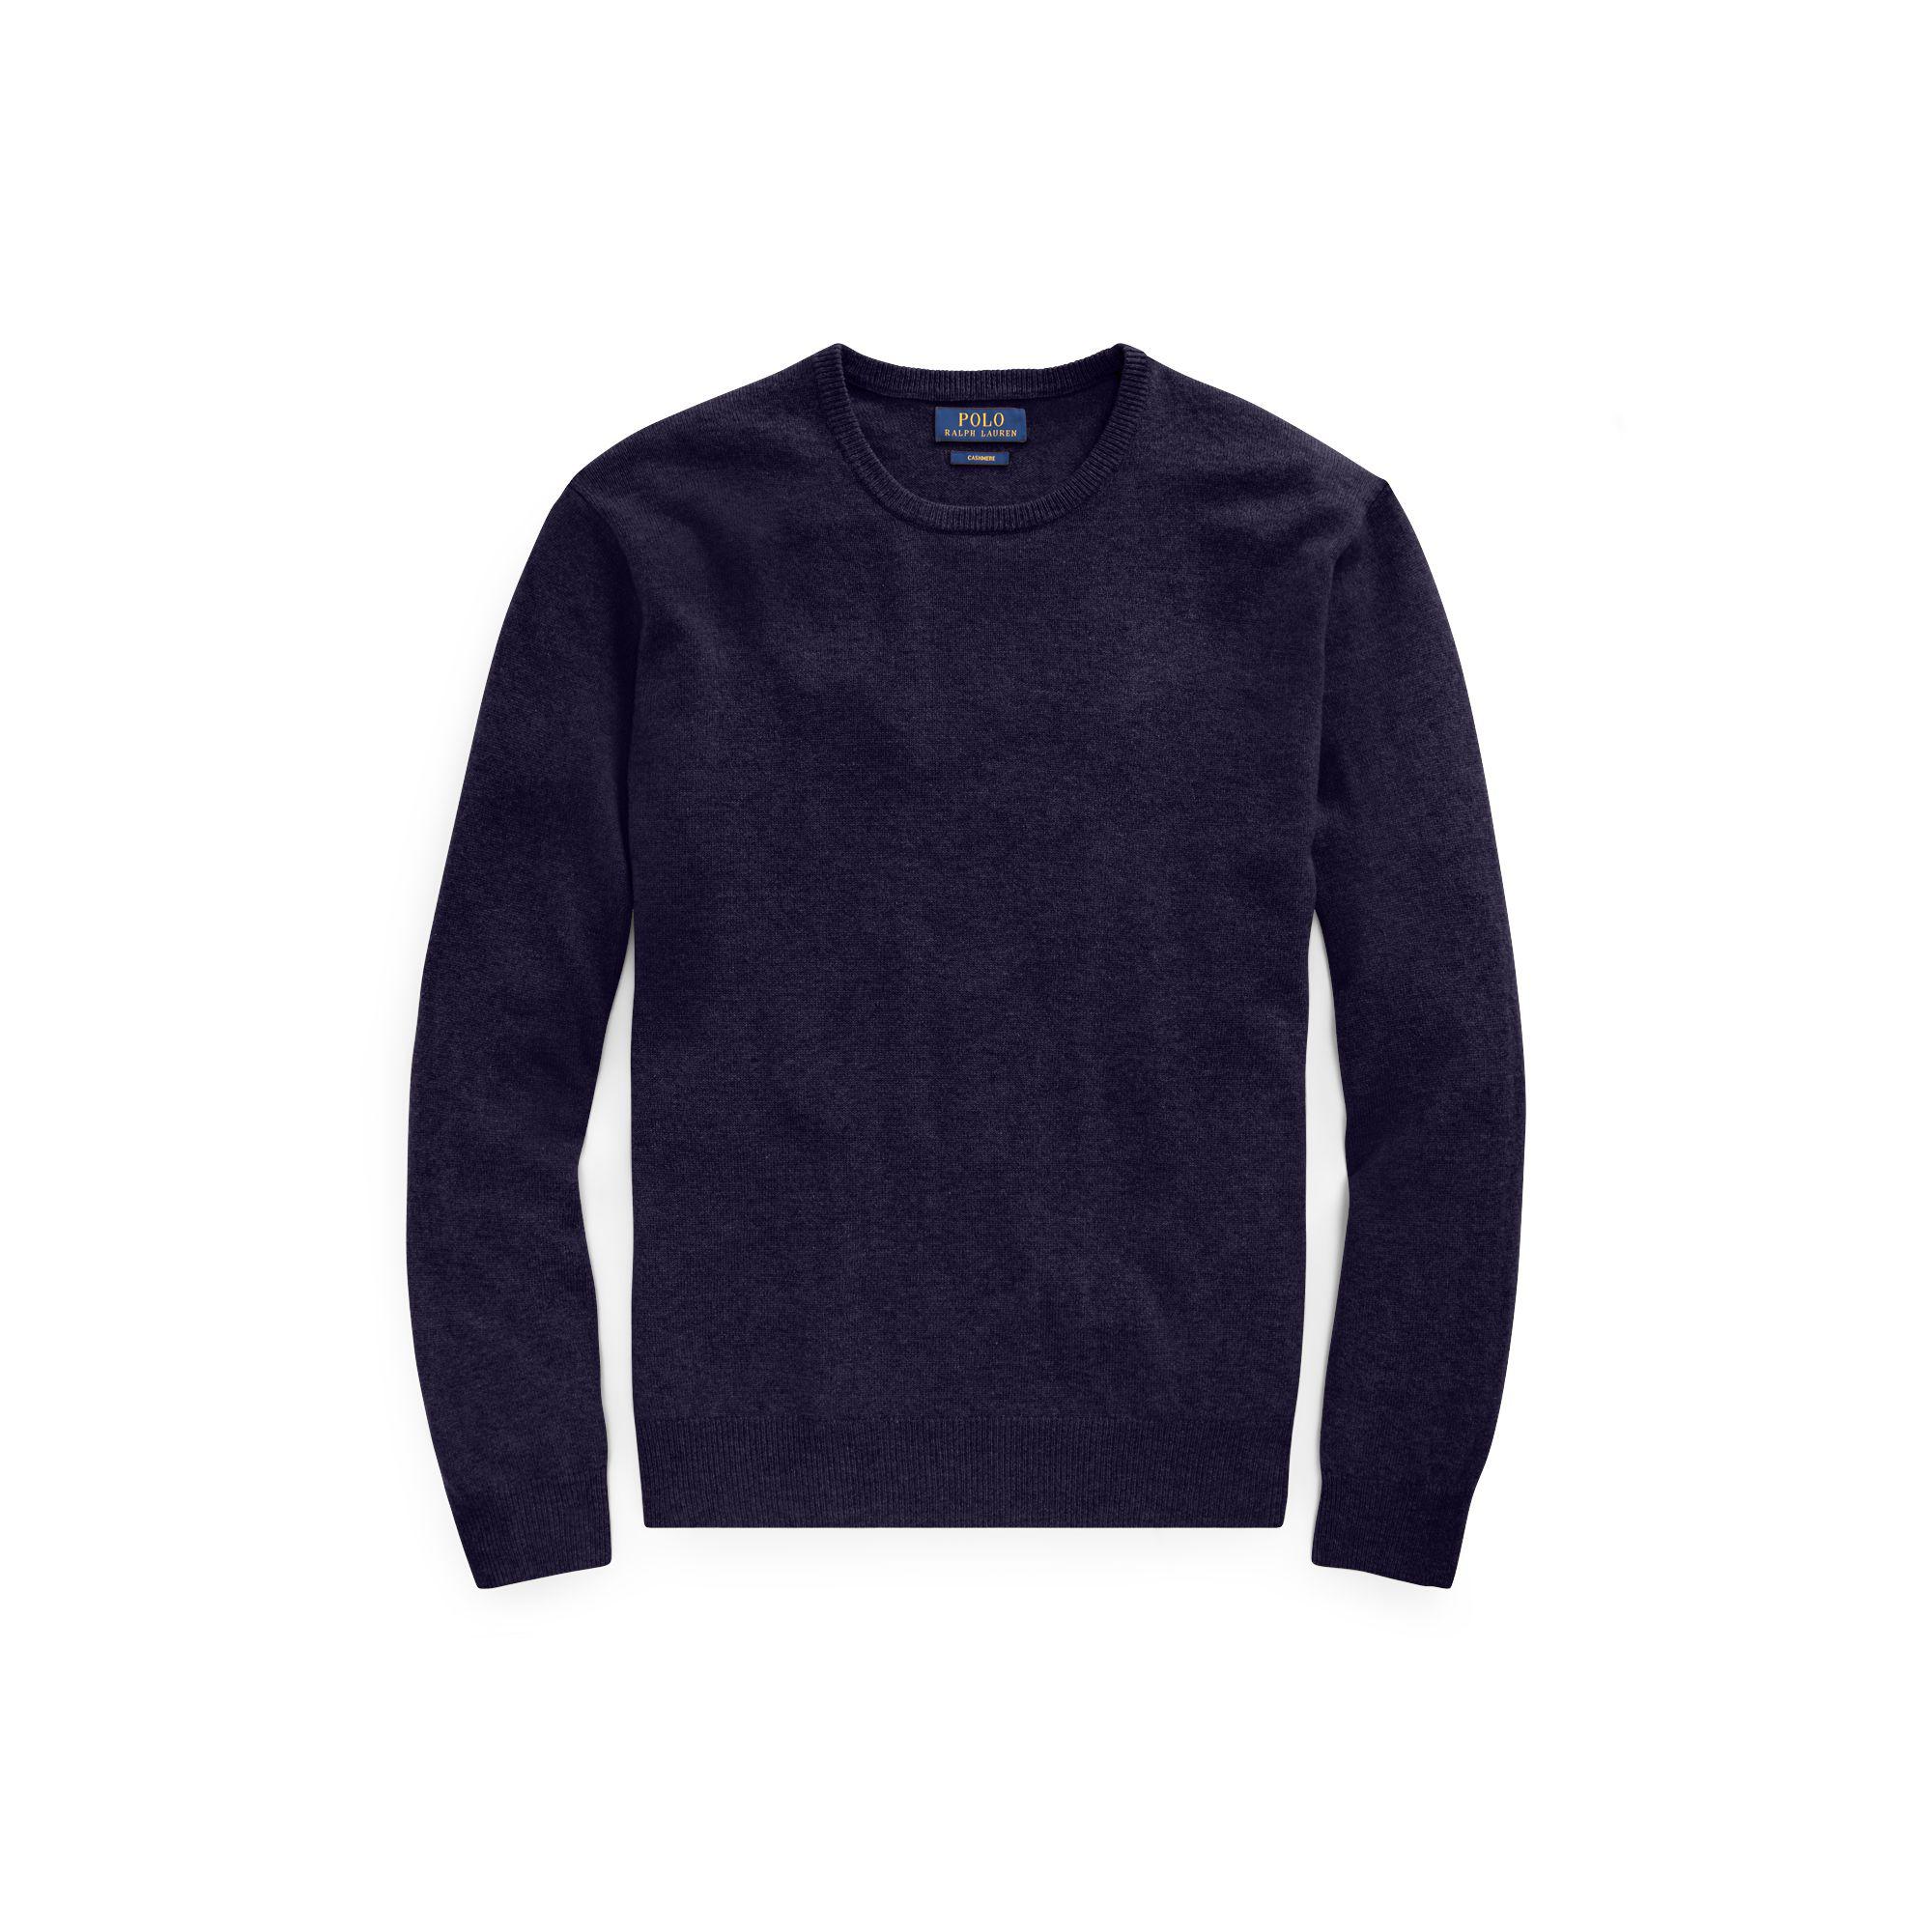 Lyst - Polo Ralph Lauren Washable Cashmere Sweater in Blue for Men ...